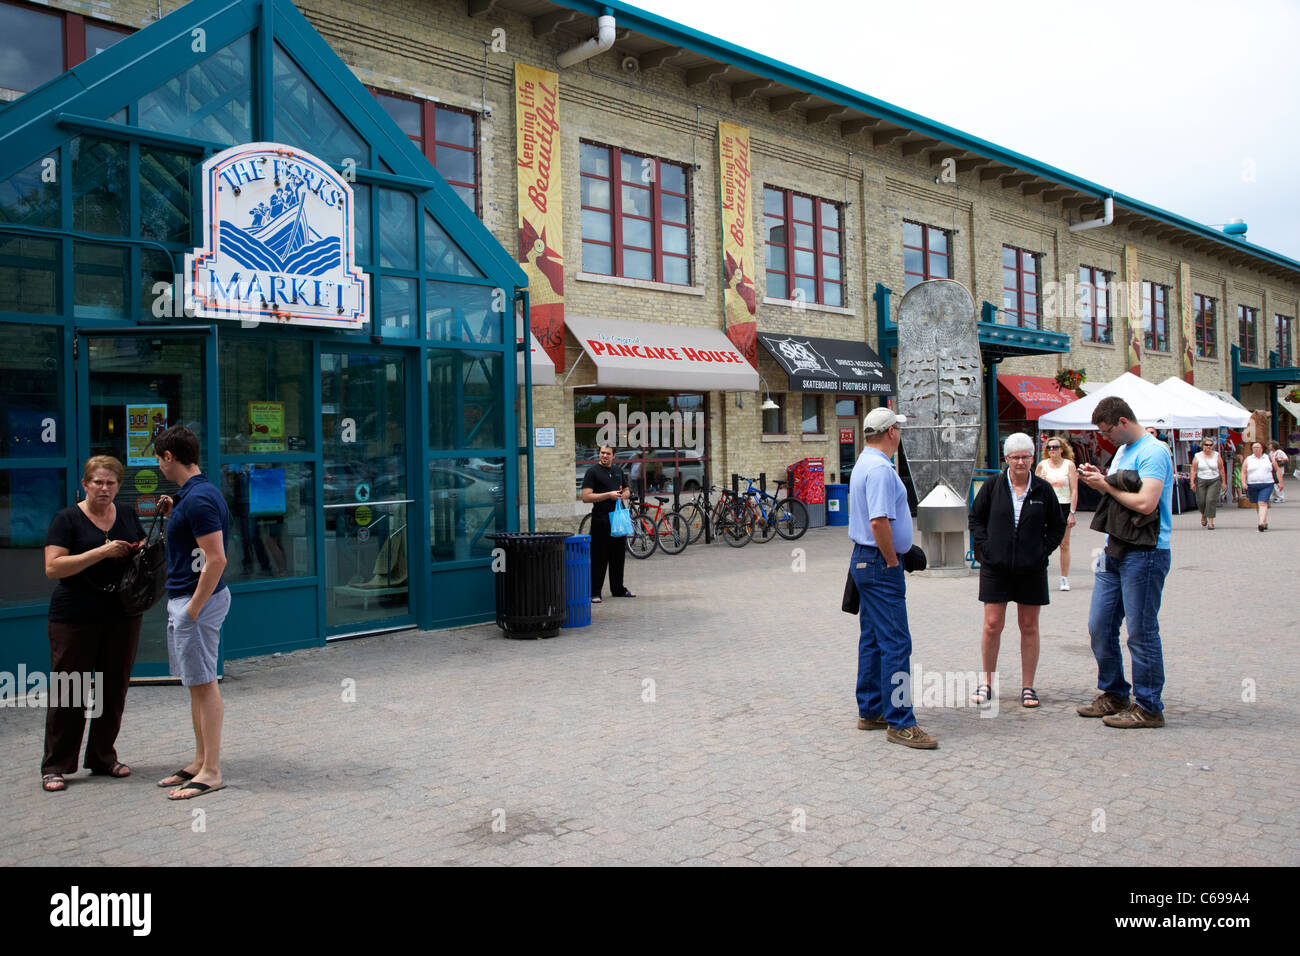 people outside the entrance to the forks market Winnipeg Manitoba Canada Stock Photo